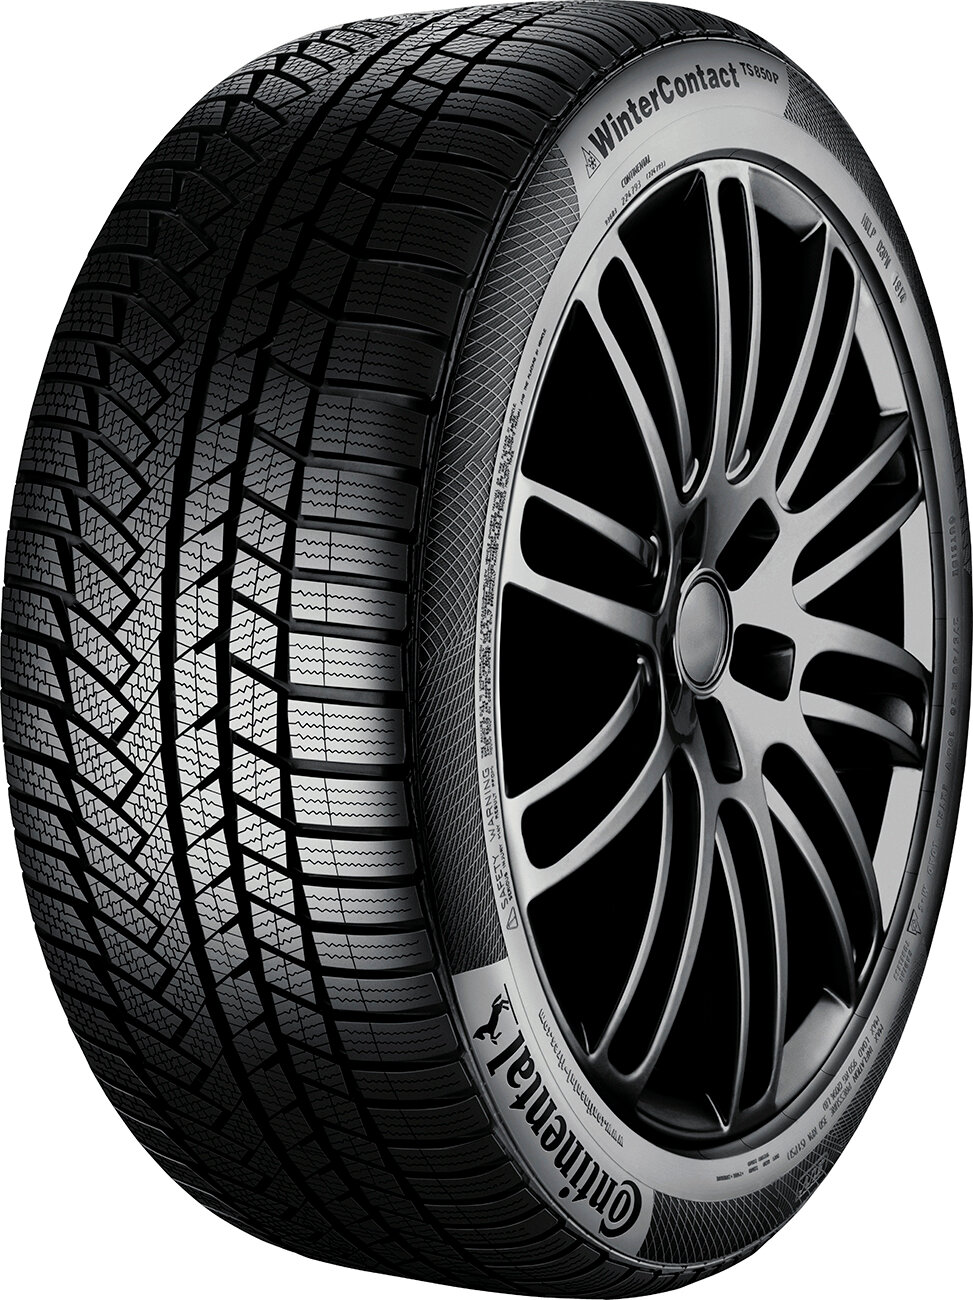   Continental ContiWinterContact TS850 235/45 R17 94H